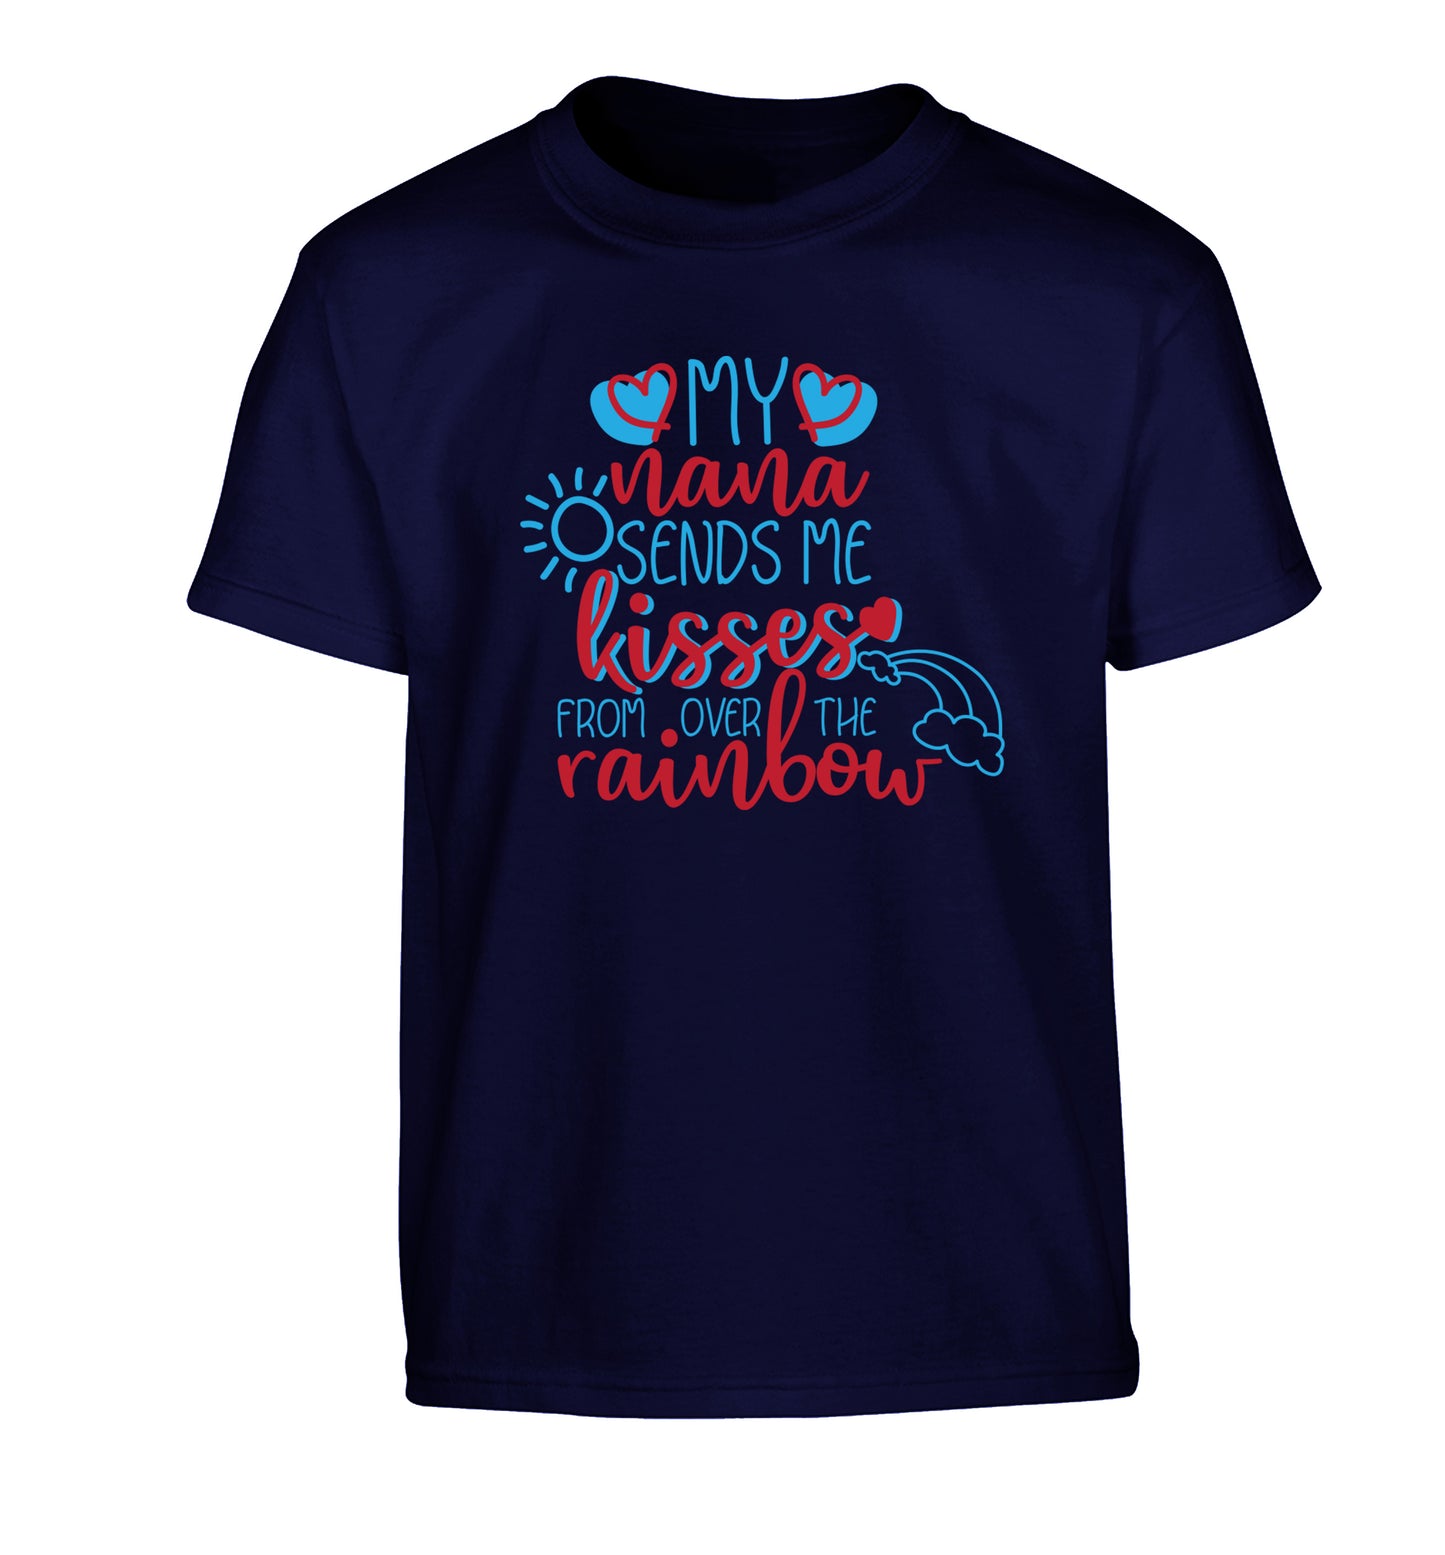 My nana sends me kisses from over the rainbow Children's navy Tshirt 12-13 Years